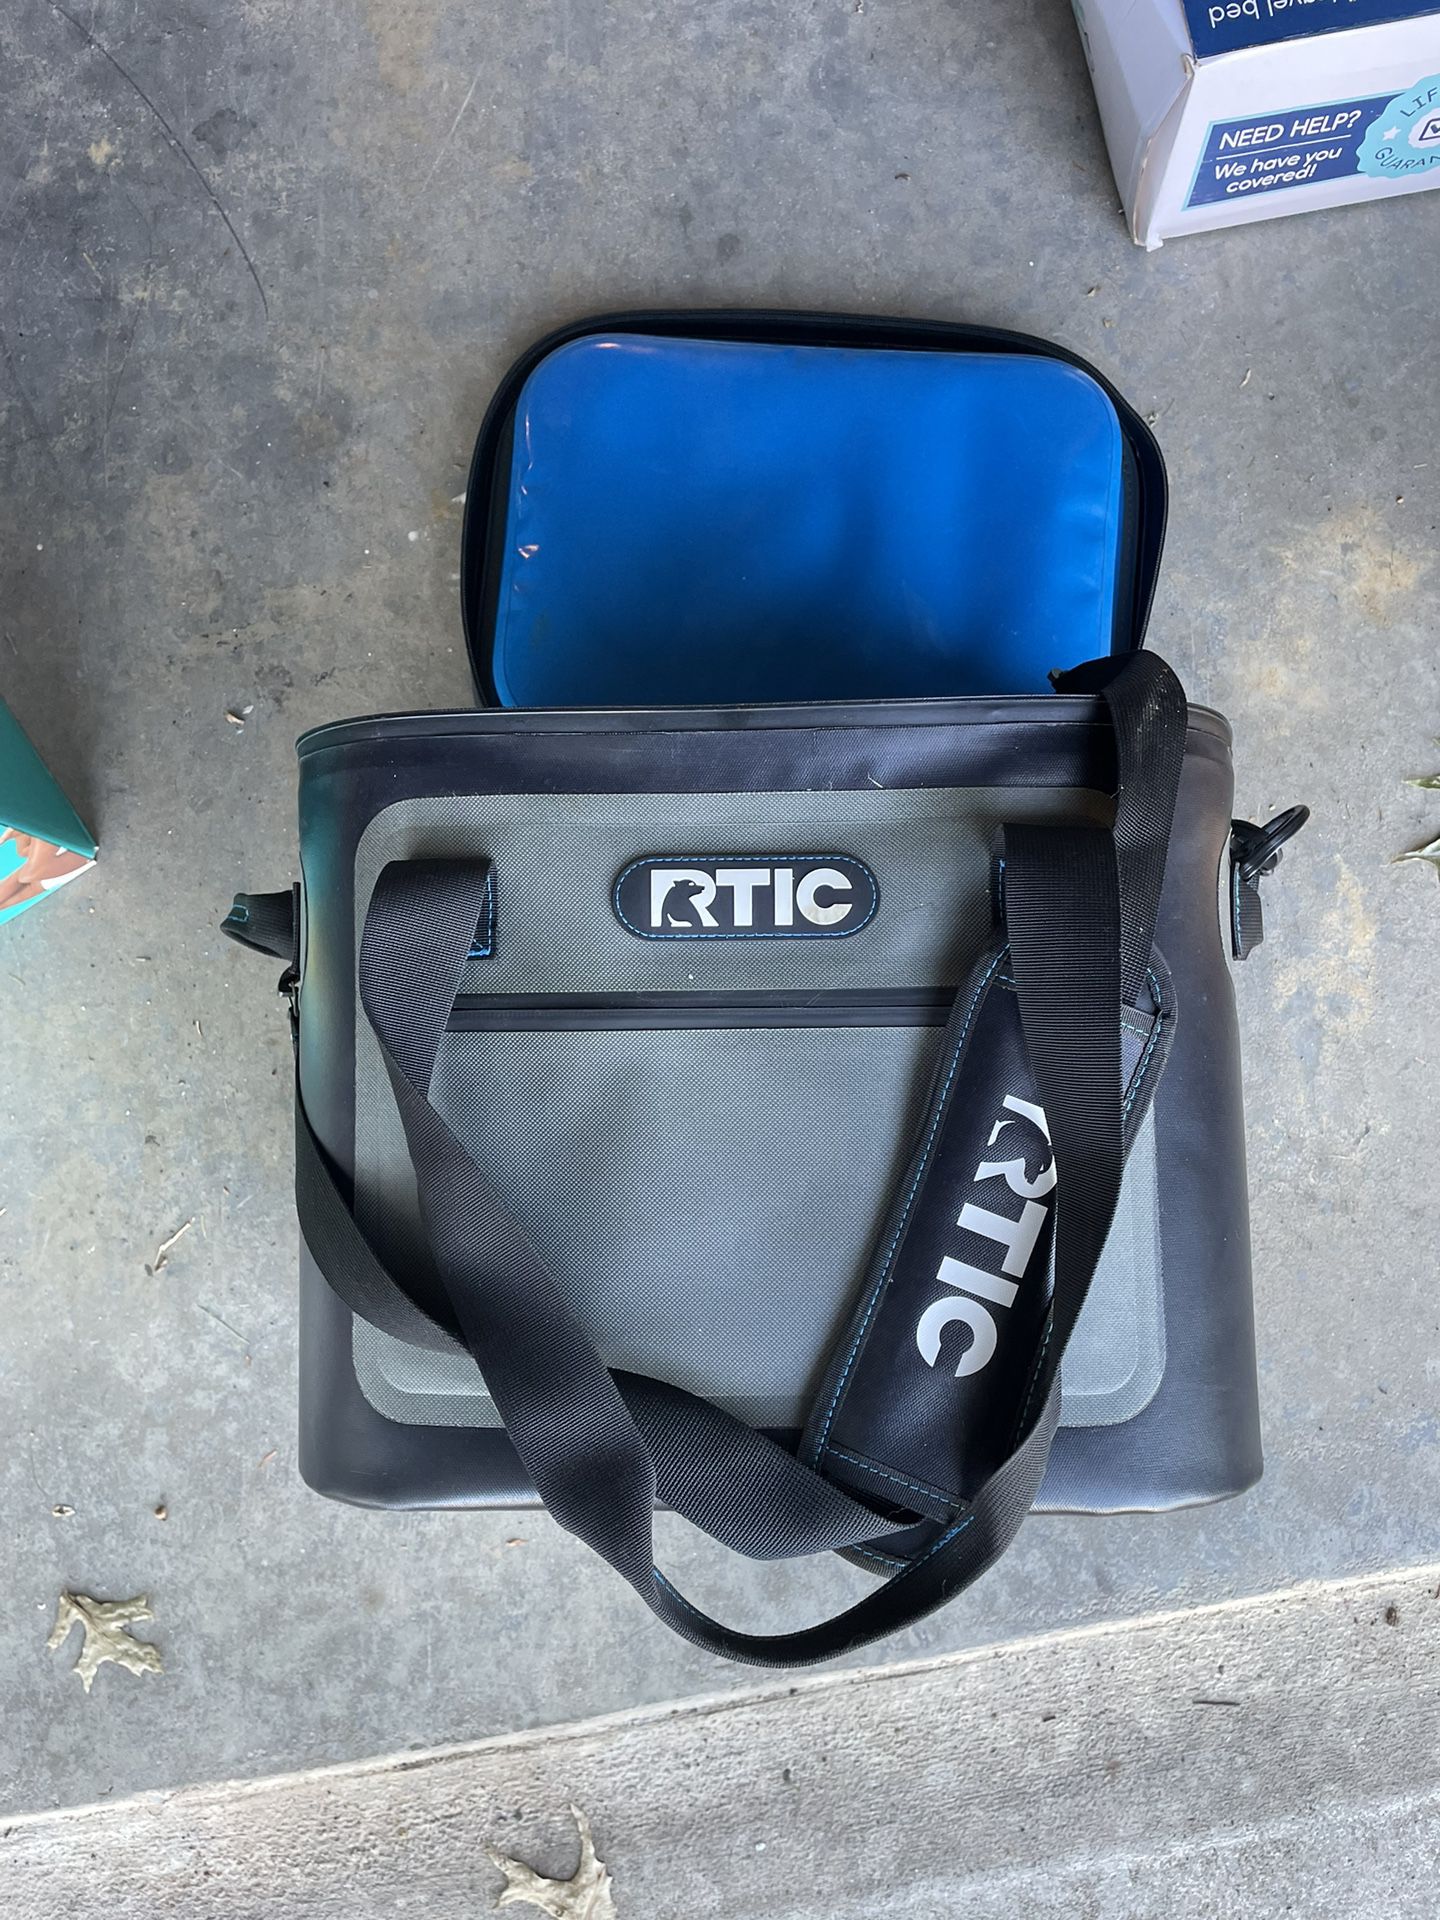 RTIC Soft pack 30 Cooler - Zipper Broken Pull for Sale in Reading